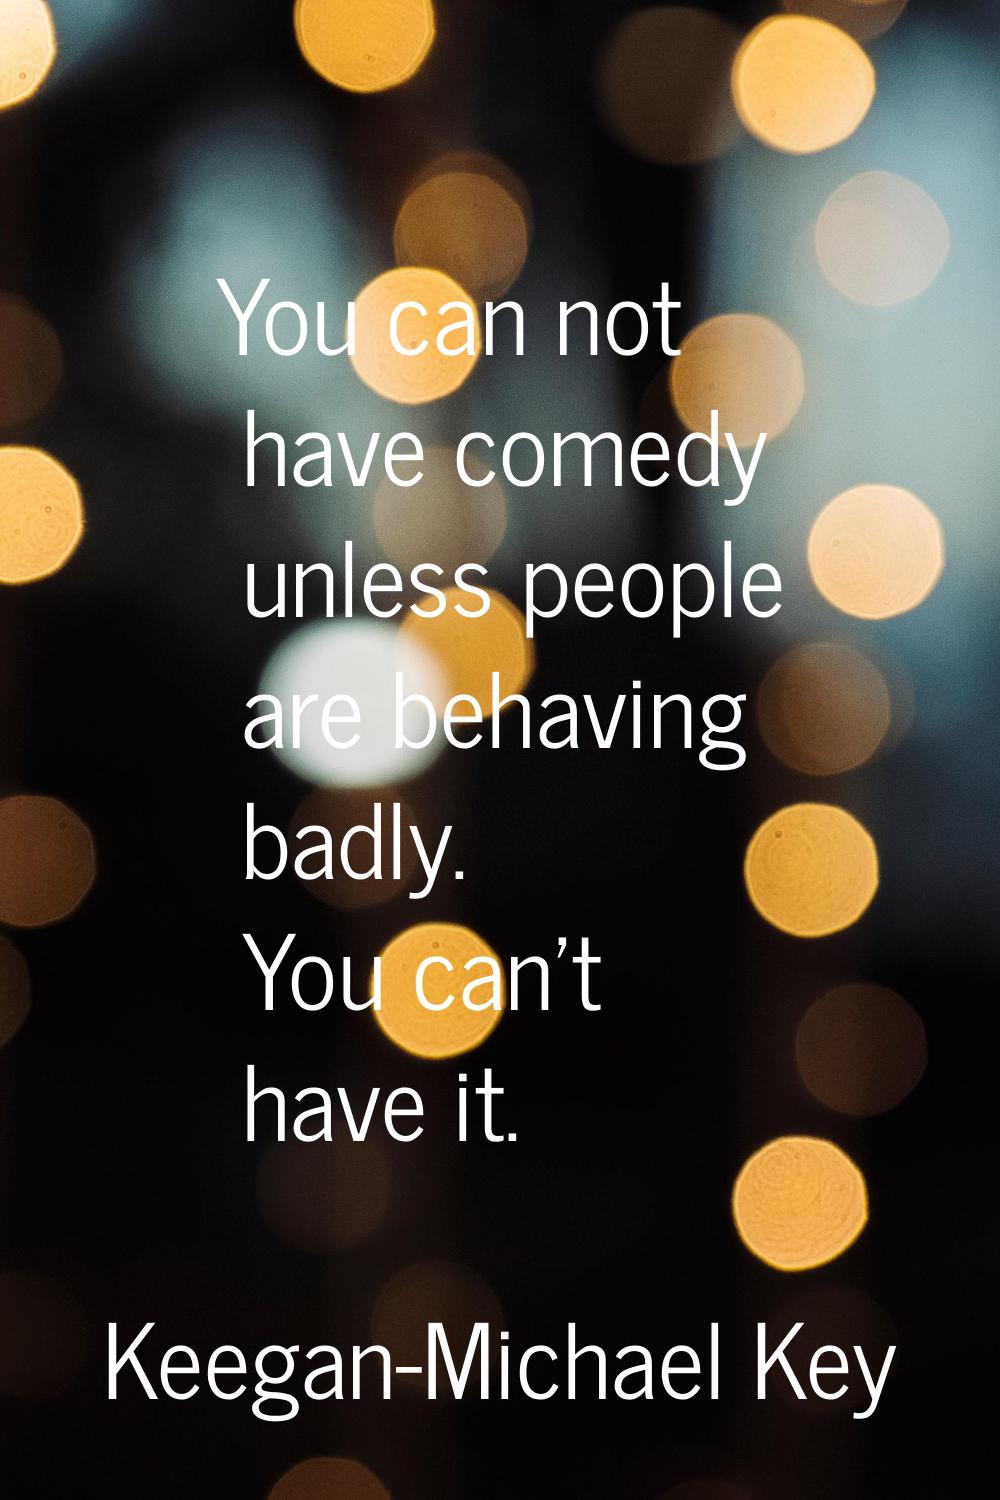 You can not have comedy unless people are behaving badly. You can't have it.